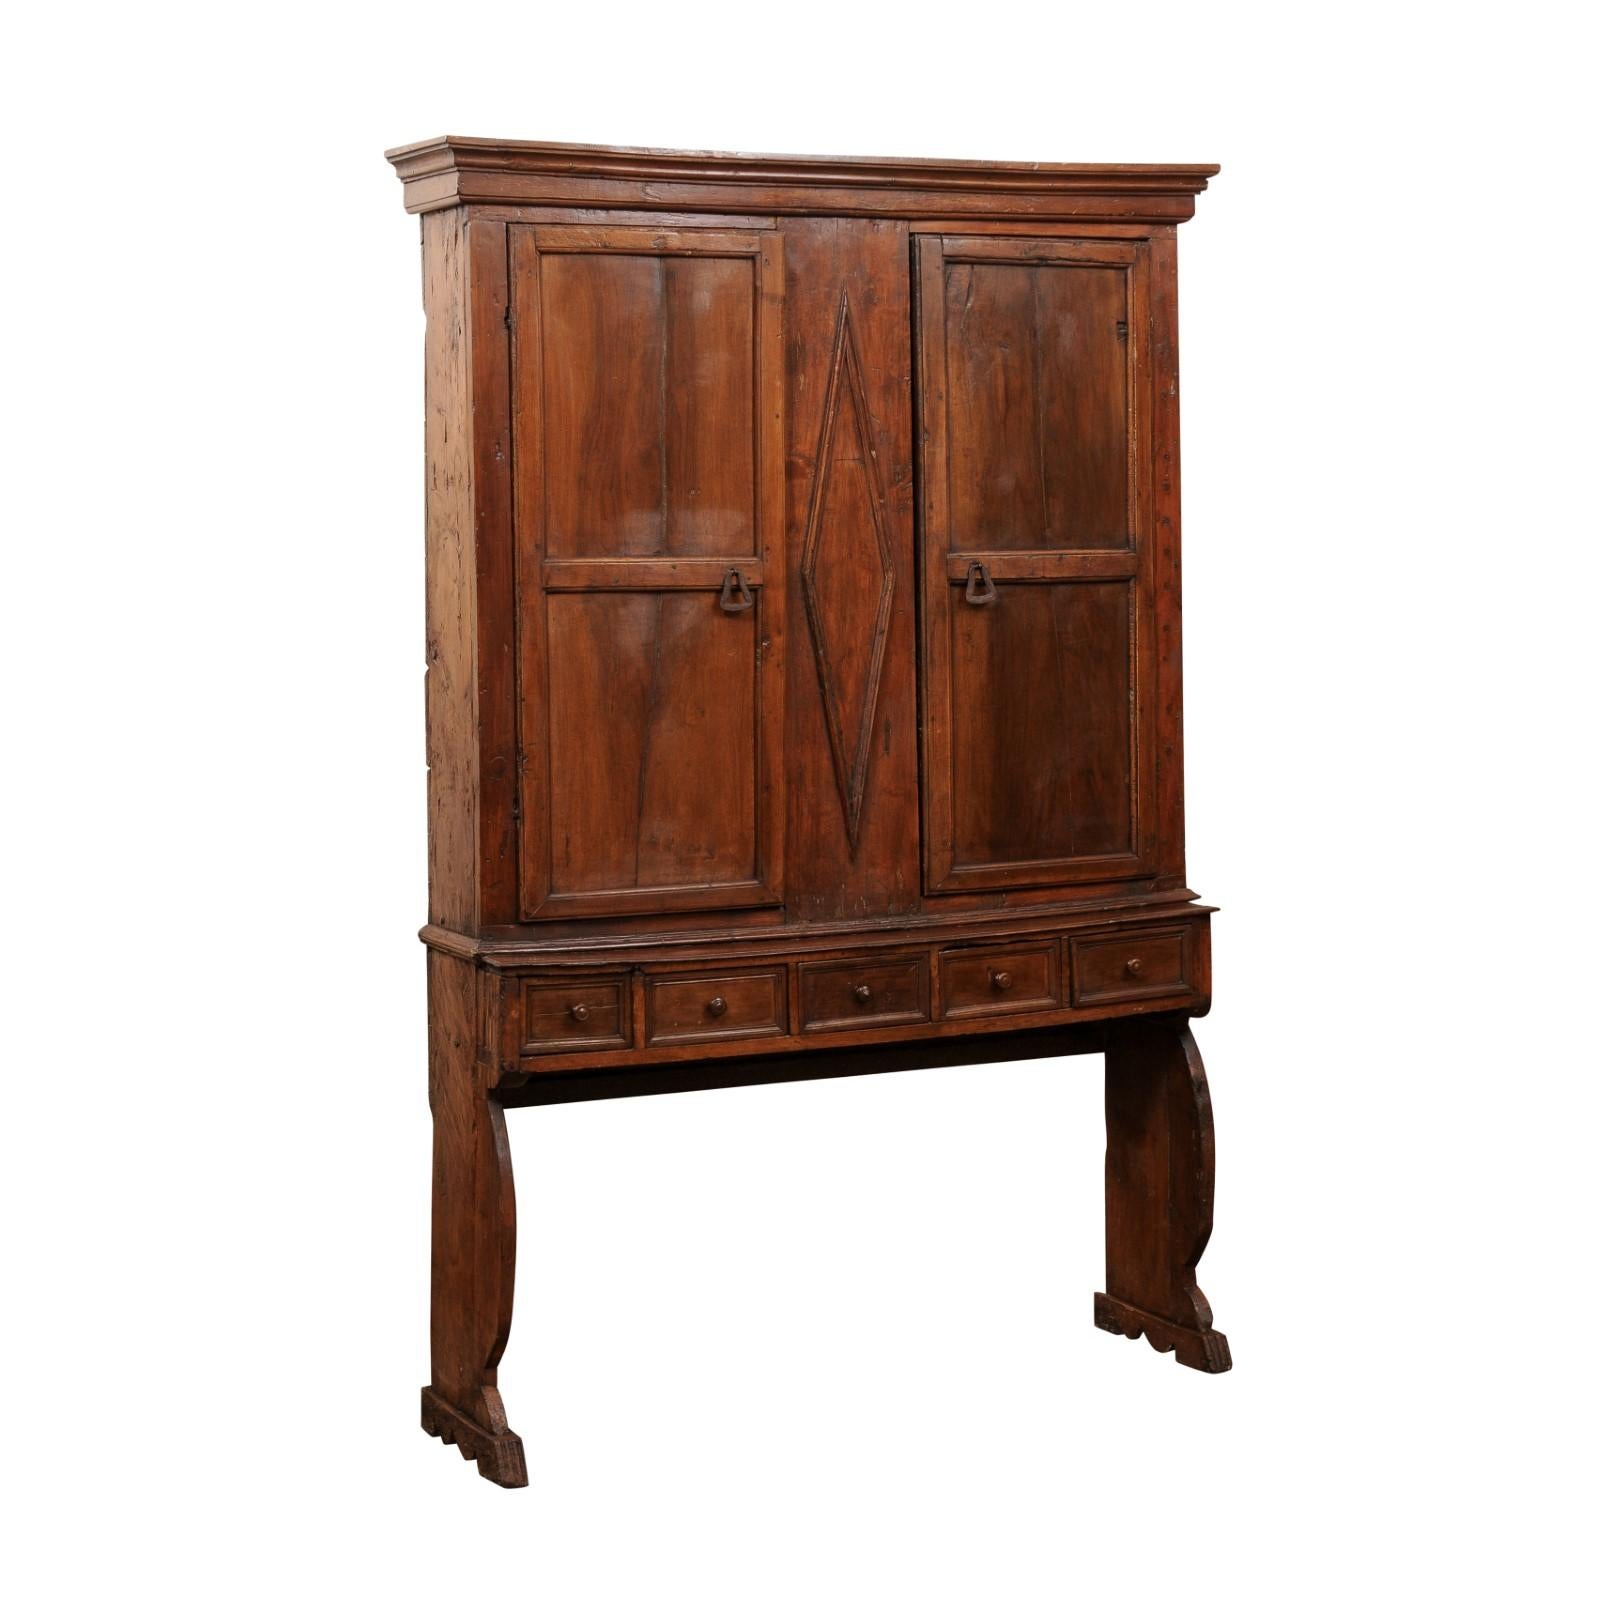 Early 18th Century Italian Walnut Cabinet on Stand with 2 Doors & 5 Small Drawers